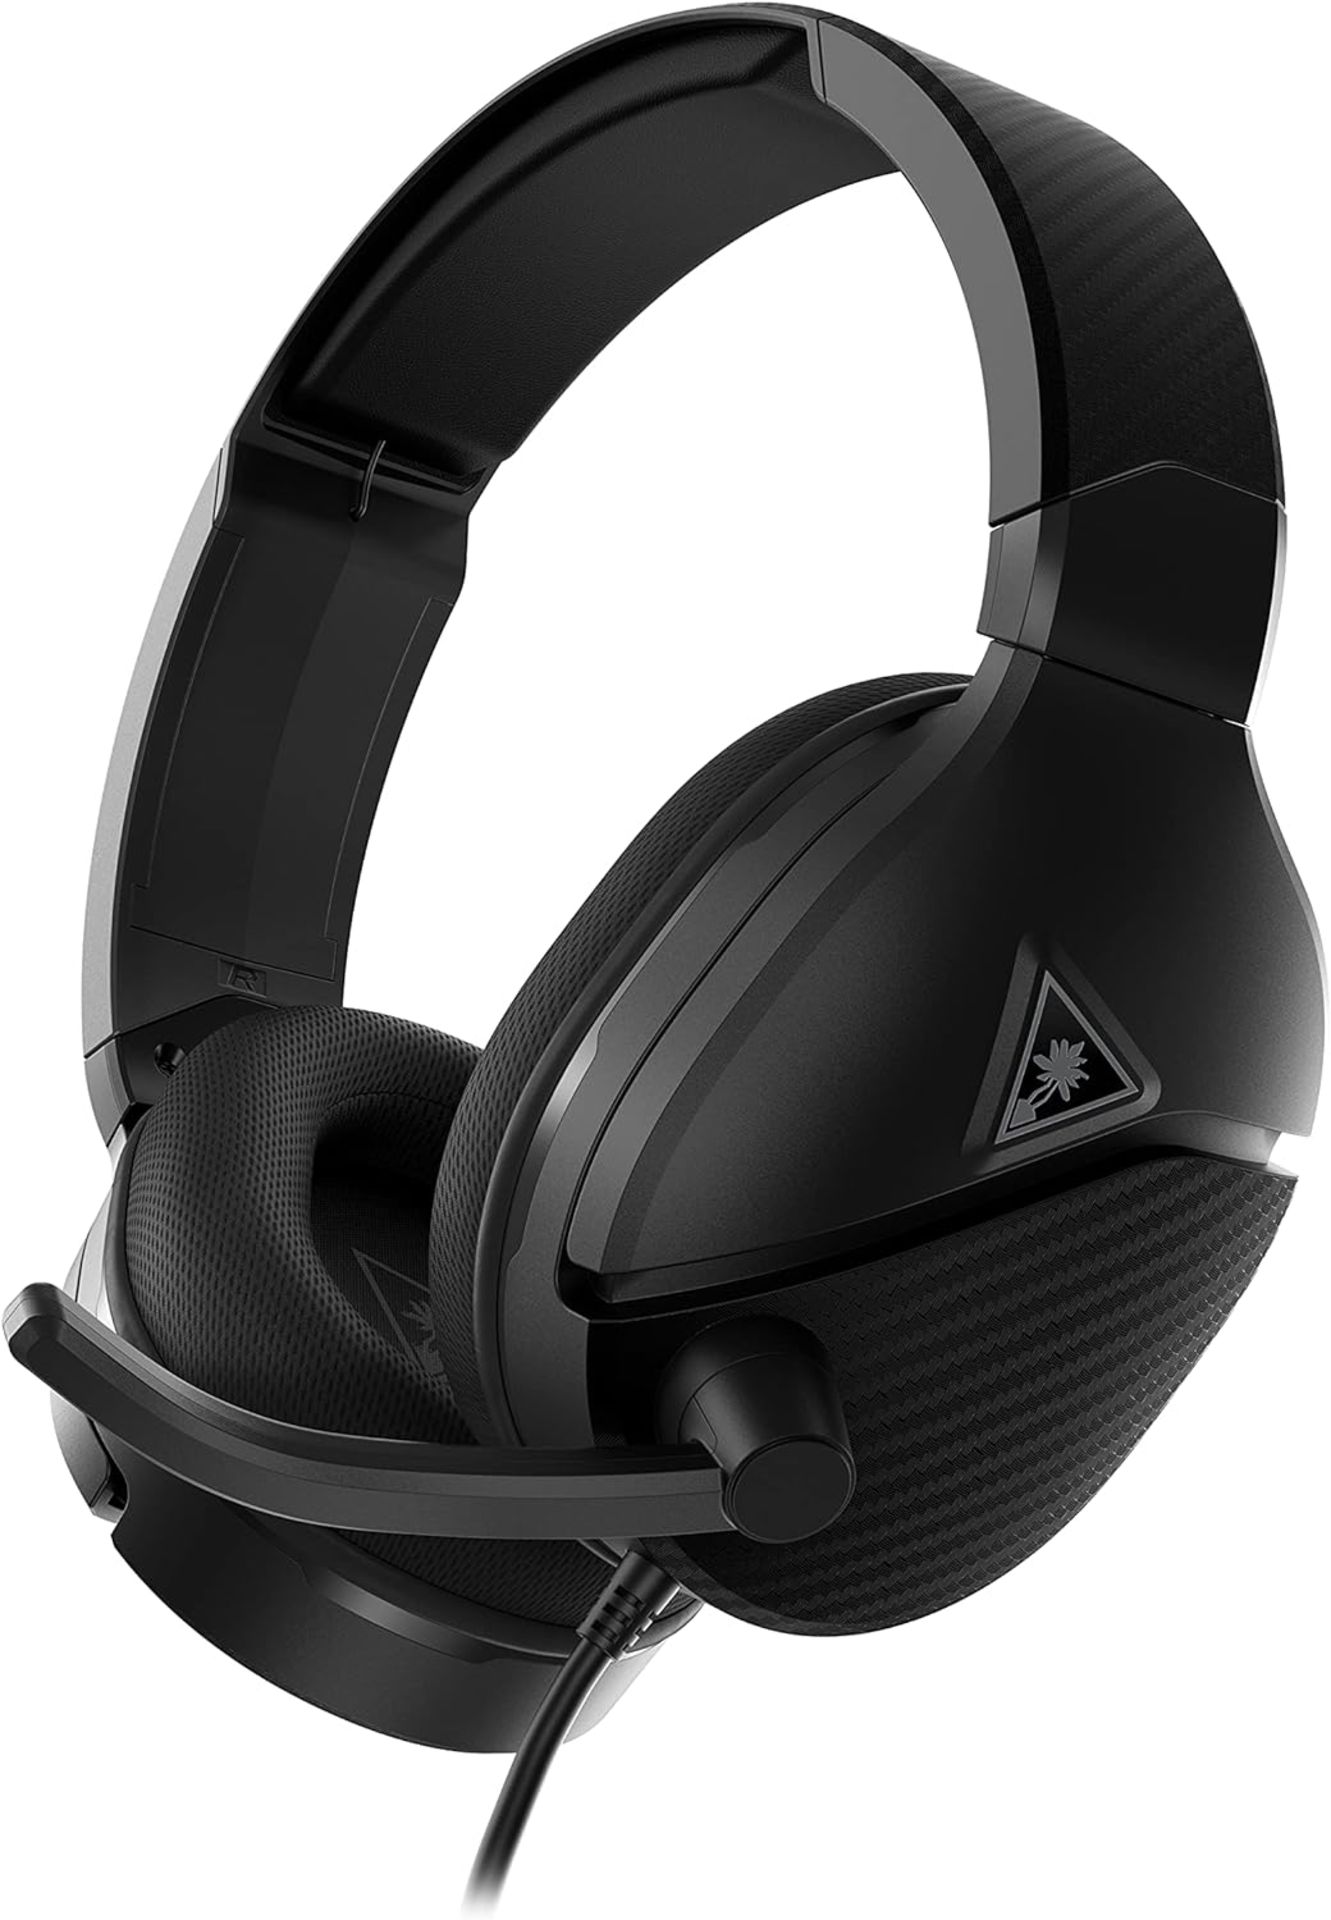 Turtle Beach Recon 200 Gen 2 Amplified Gaming Headset - PS4, PS5, Xbox Series X|S One, Nintendo